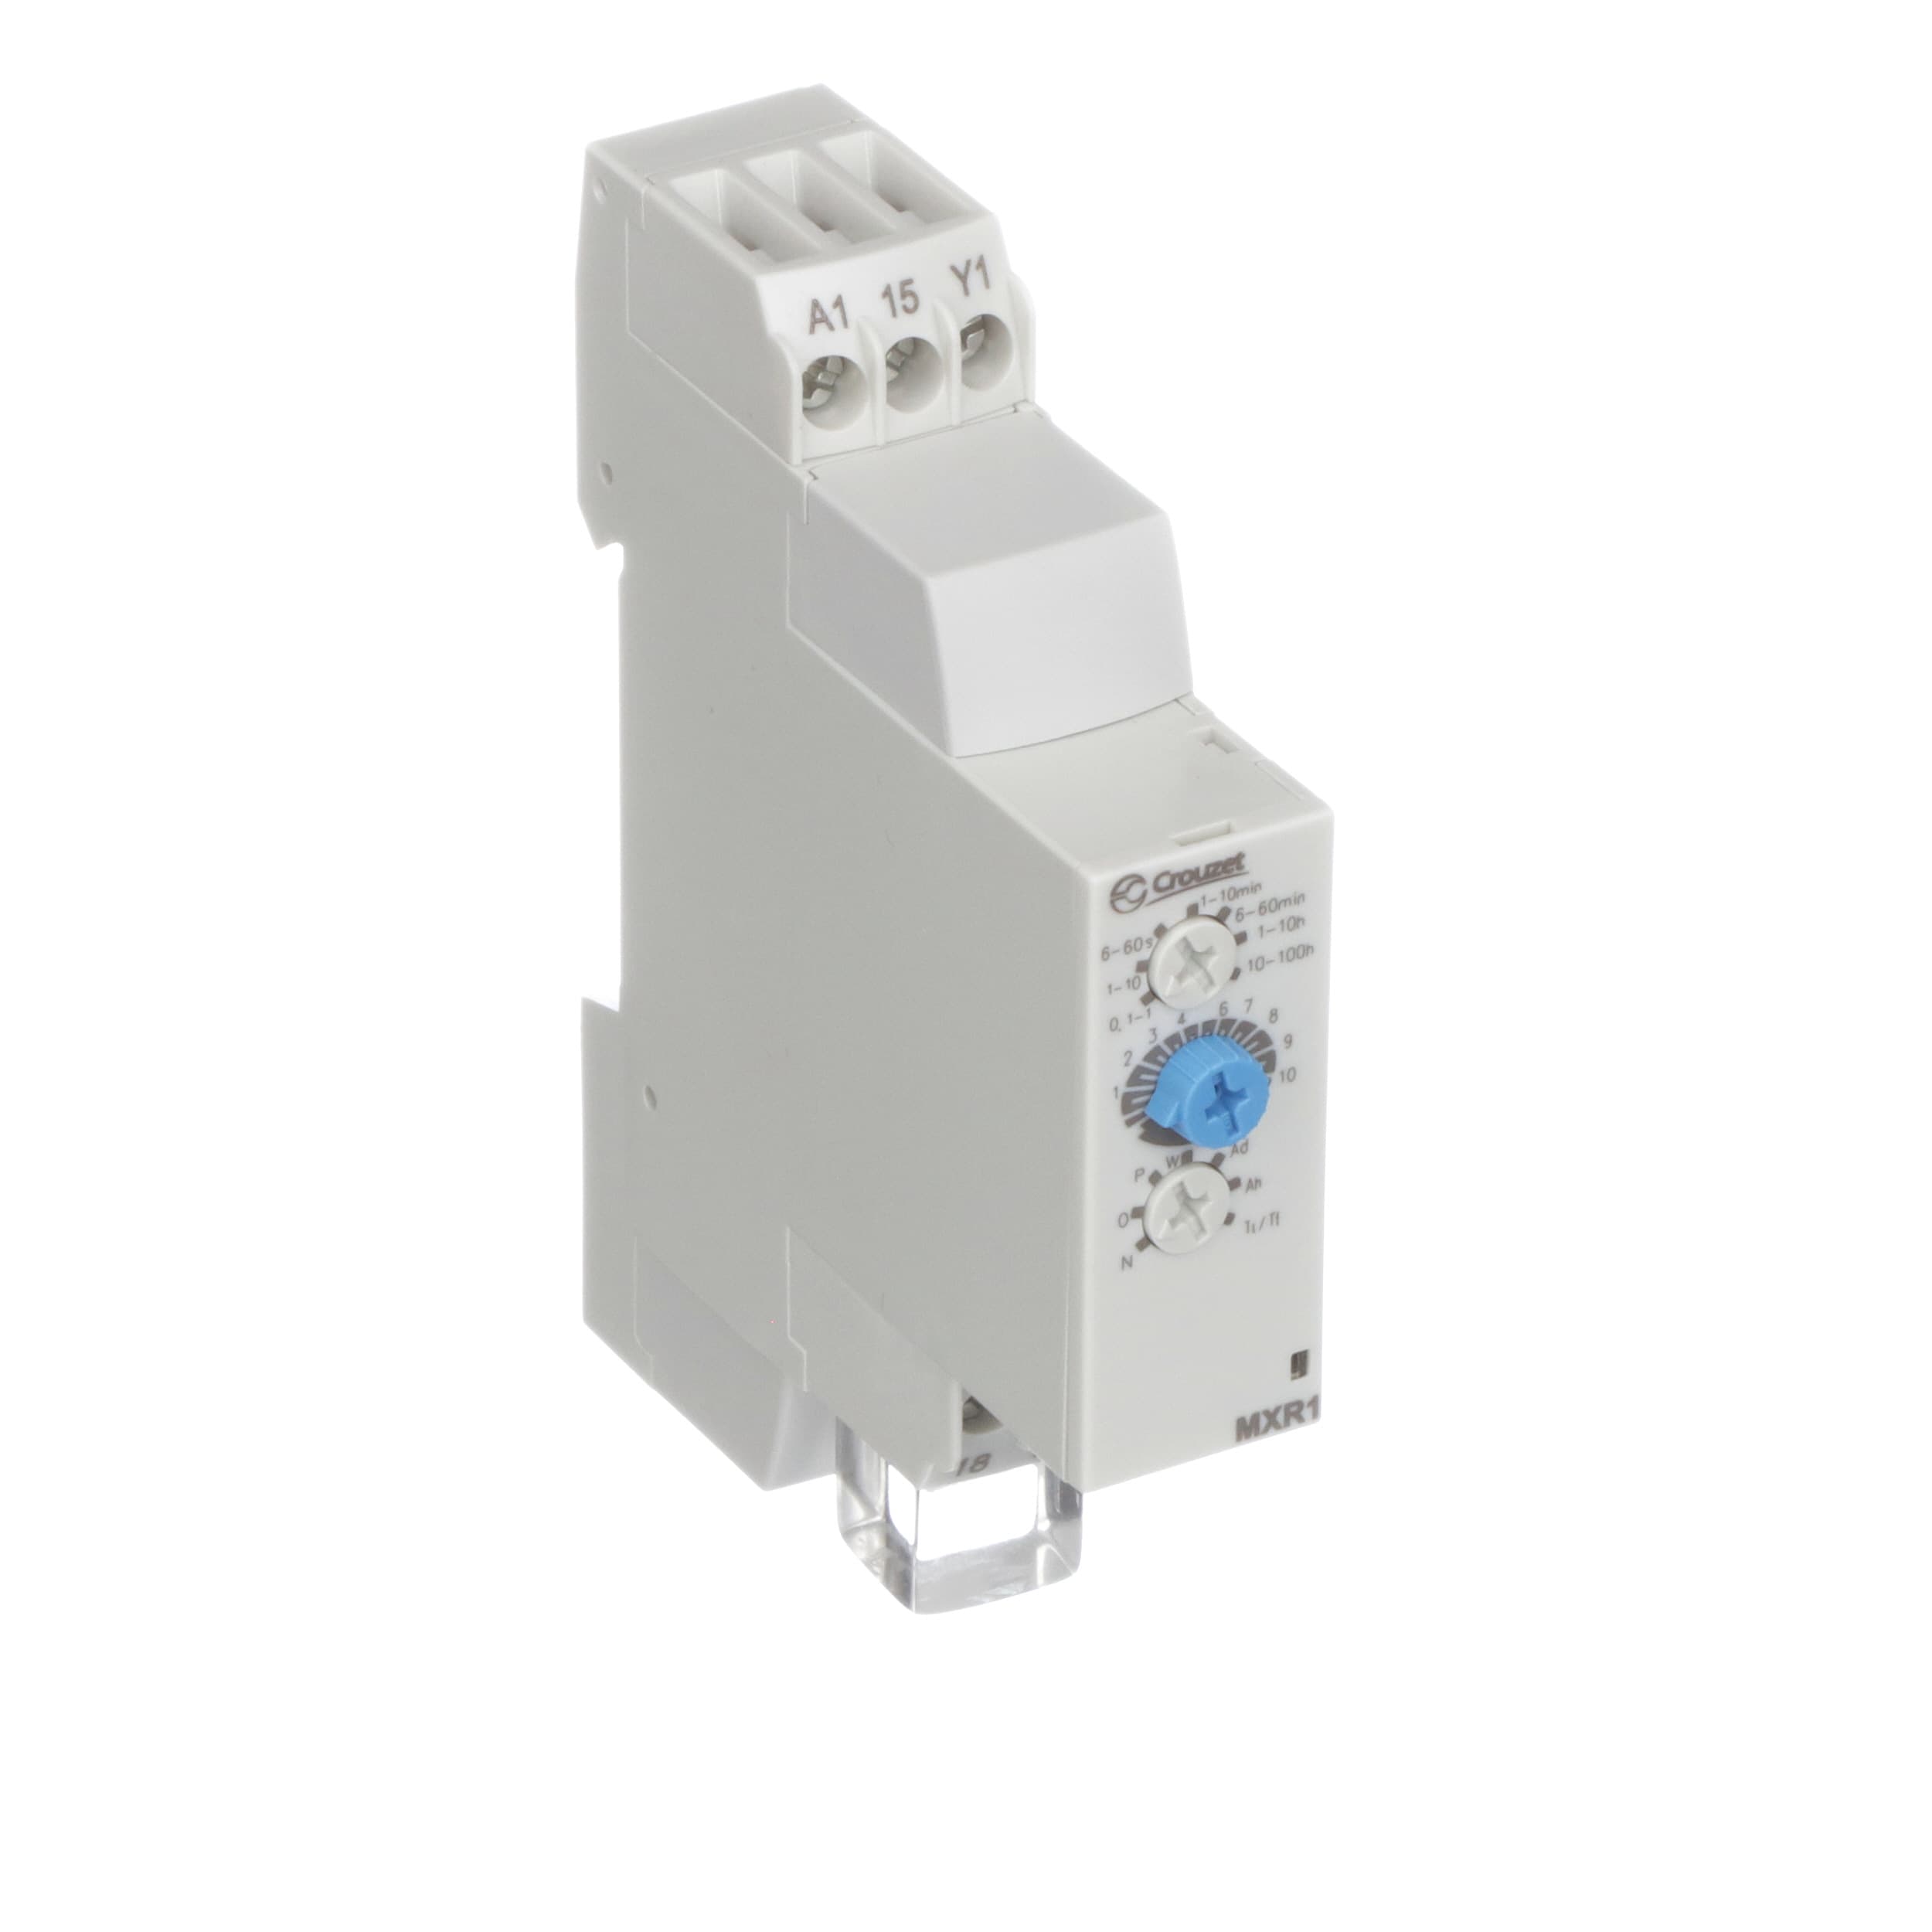 Crouzet - 88827185 Timer Relay,0.1 s-100 h,24VDC/24-240VAC C/O Output,Screw Term.,DIN Mnt - RS